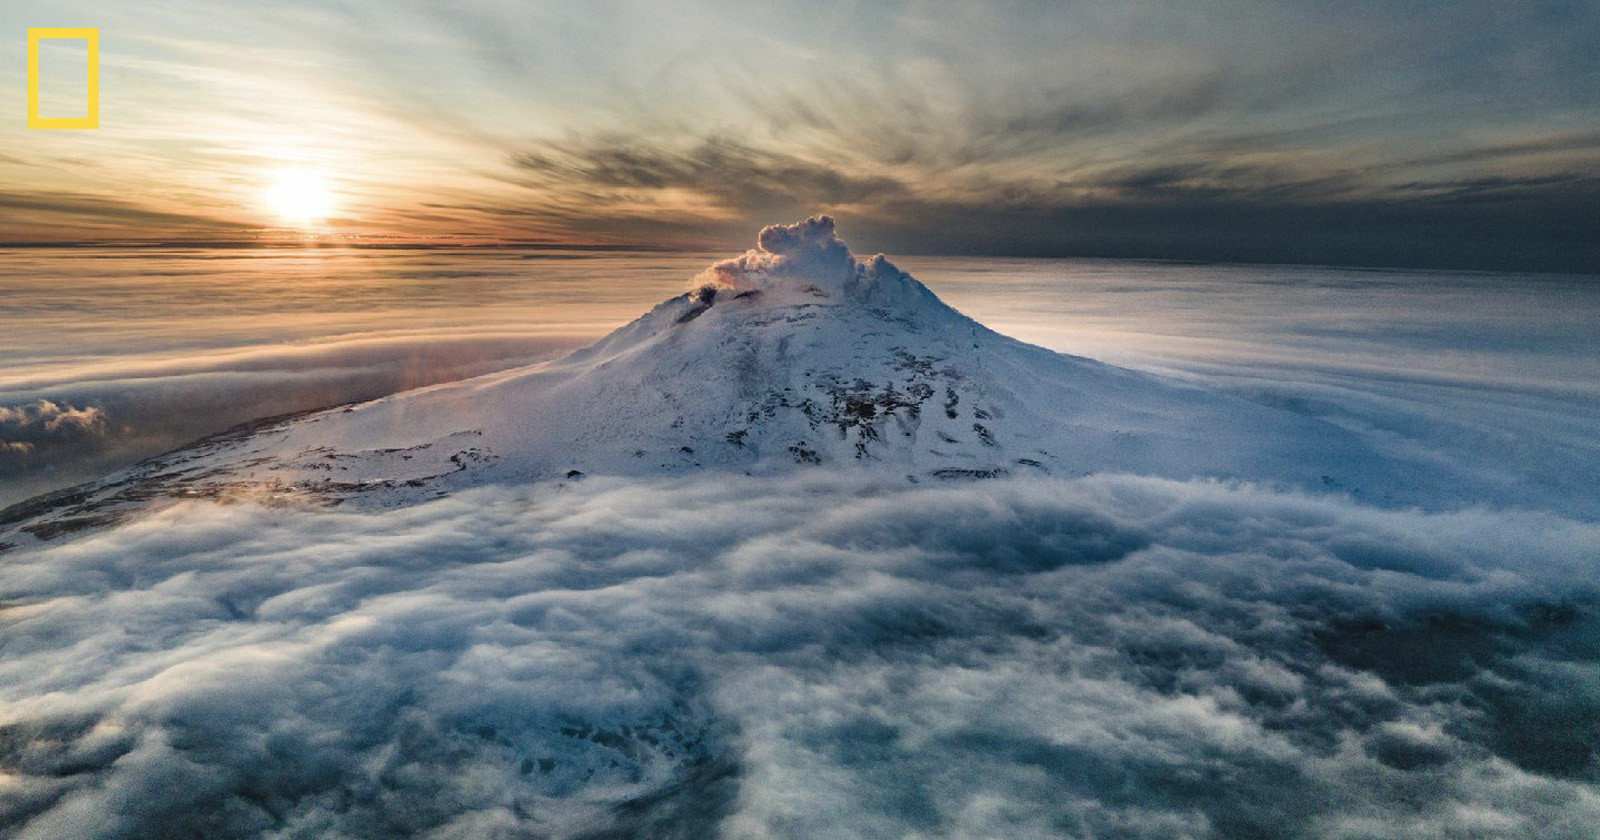 Photos from the First-Ever Ascent of Mt. Michel, an Ultra-Remote Volcano